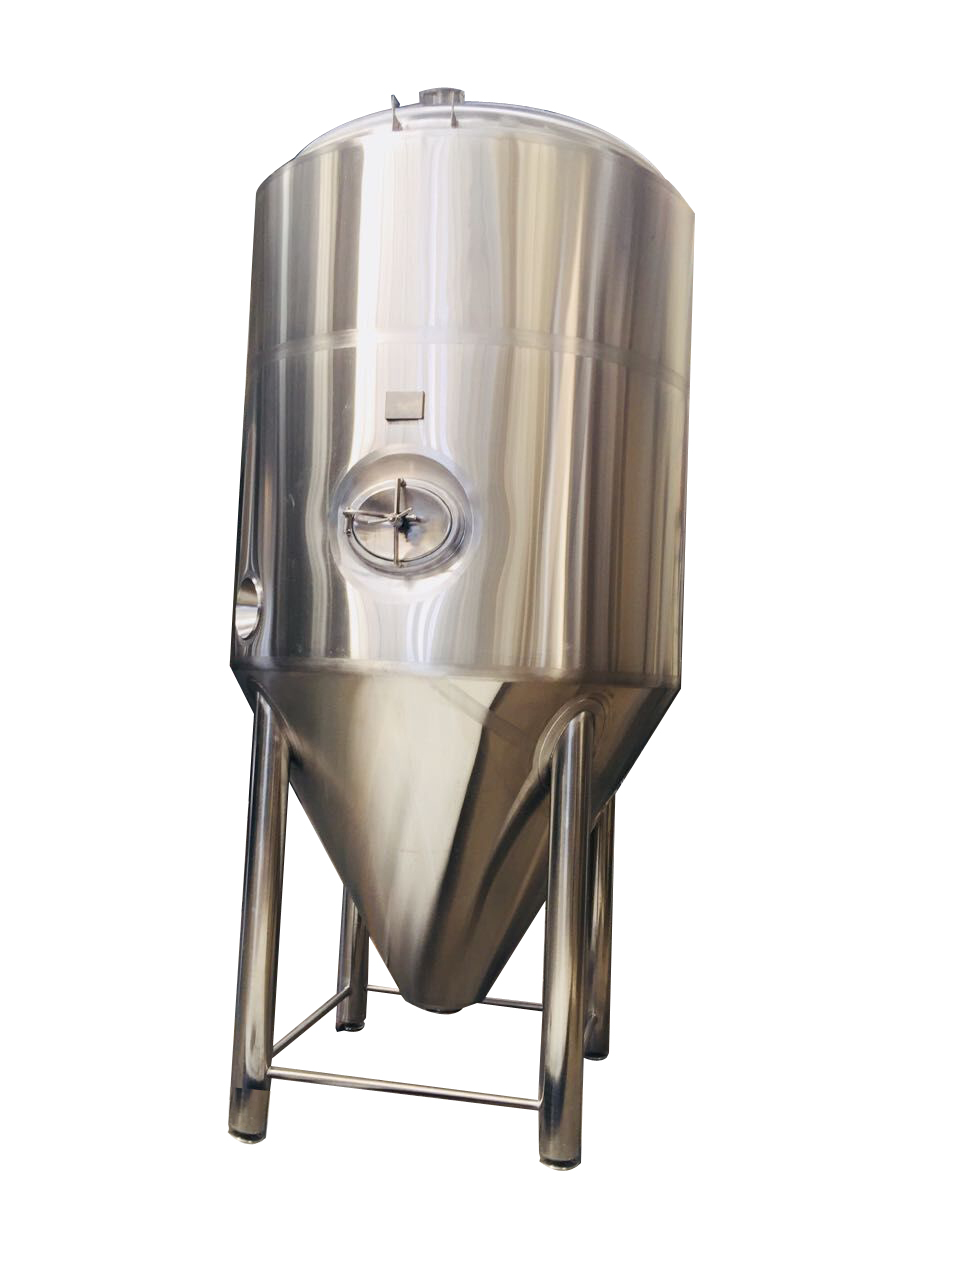 WEMAC Commercial 1000L beer brewing equipment for sale south africa